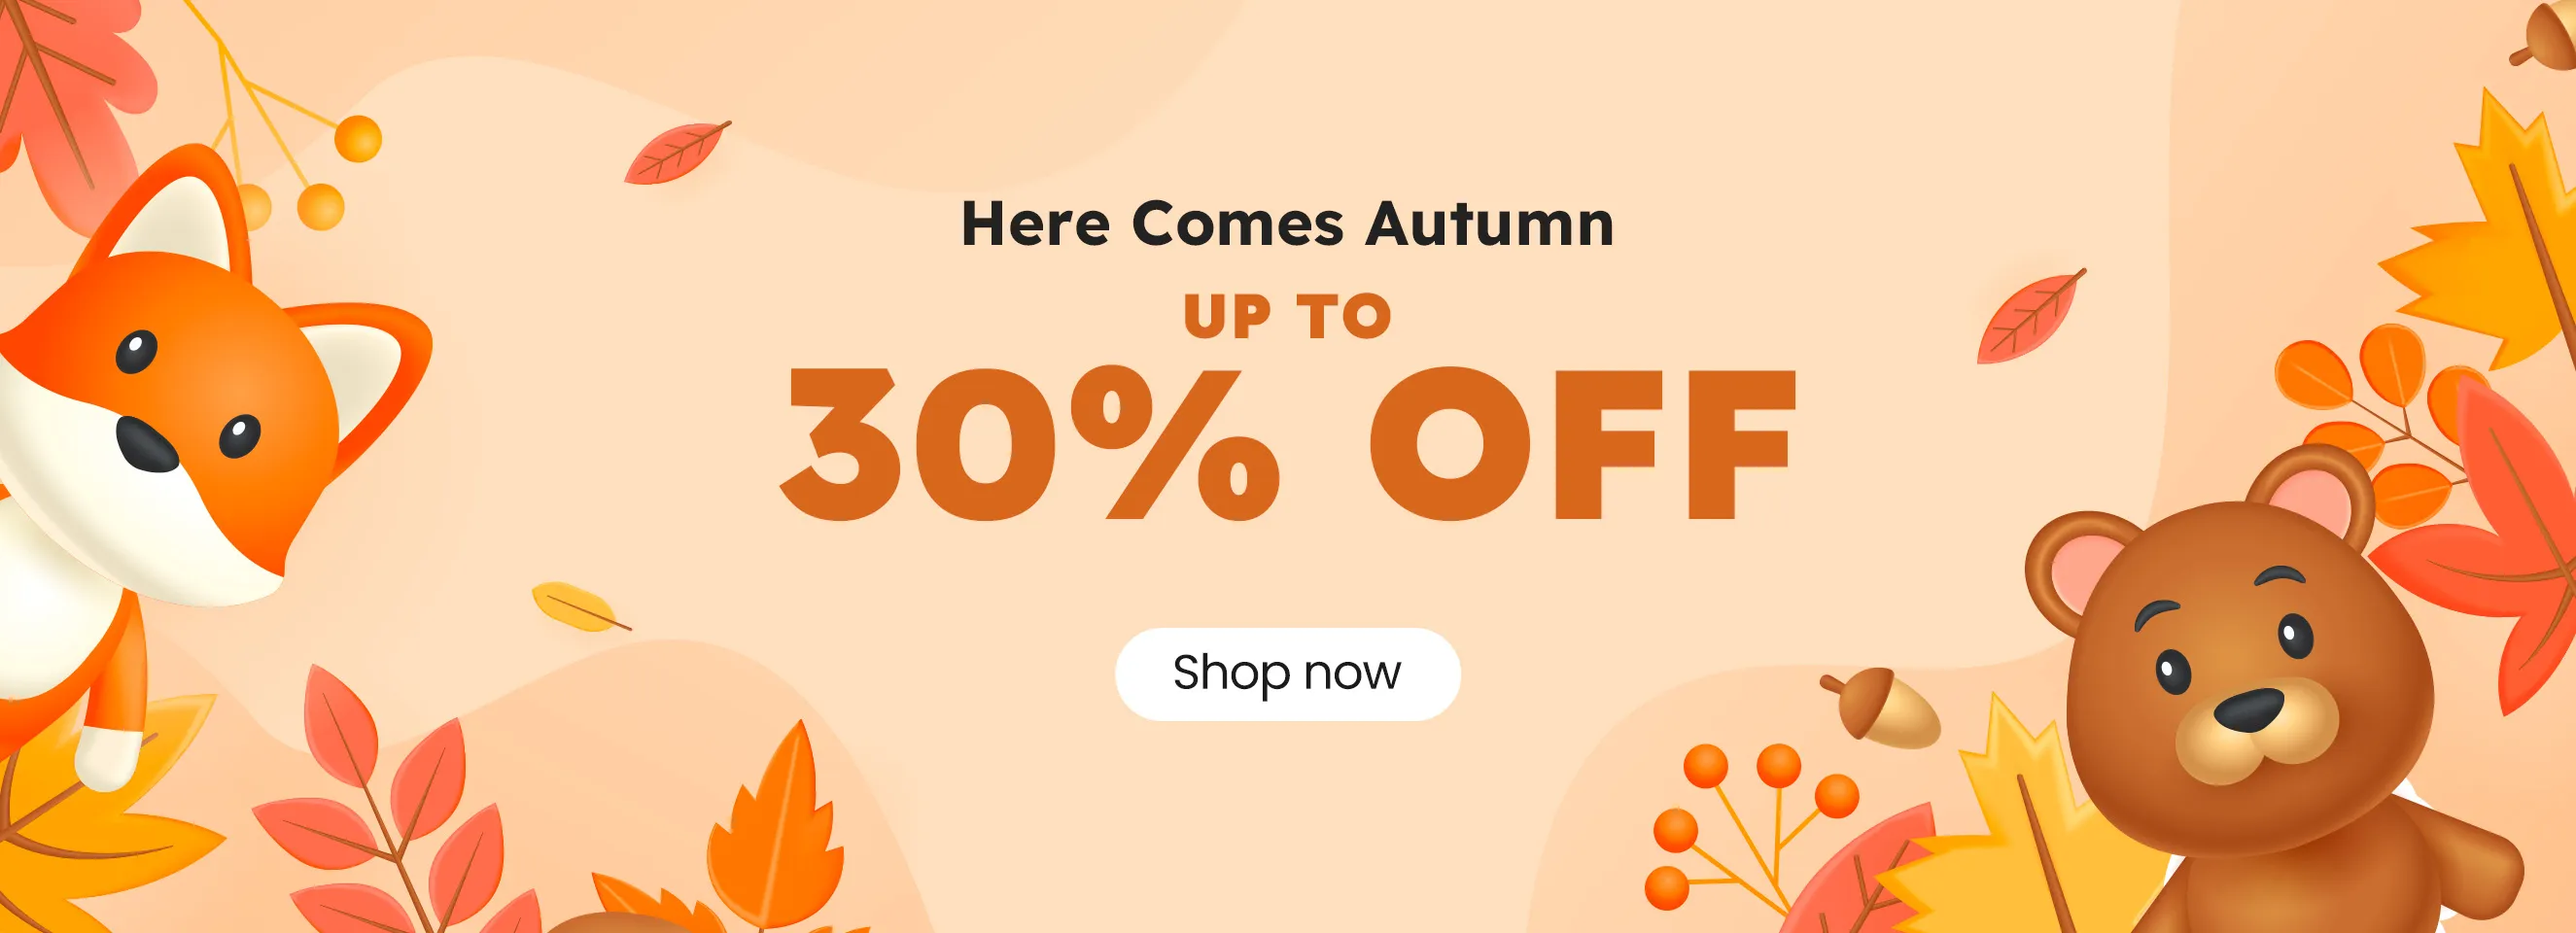 Click it to join Up to 30% OFF activity